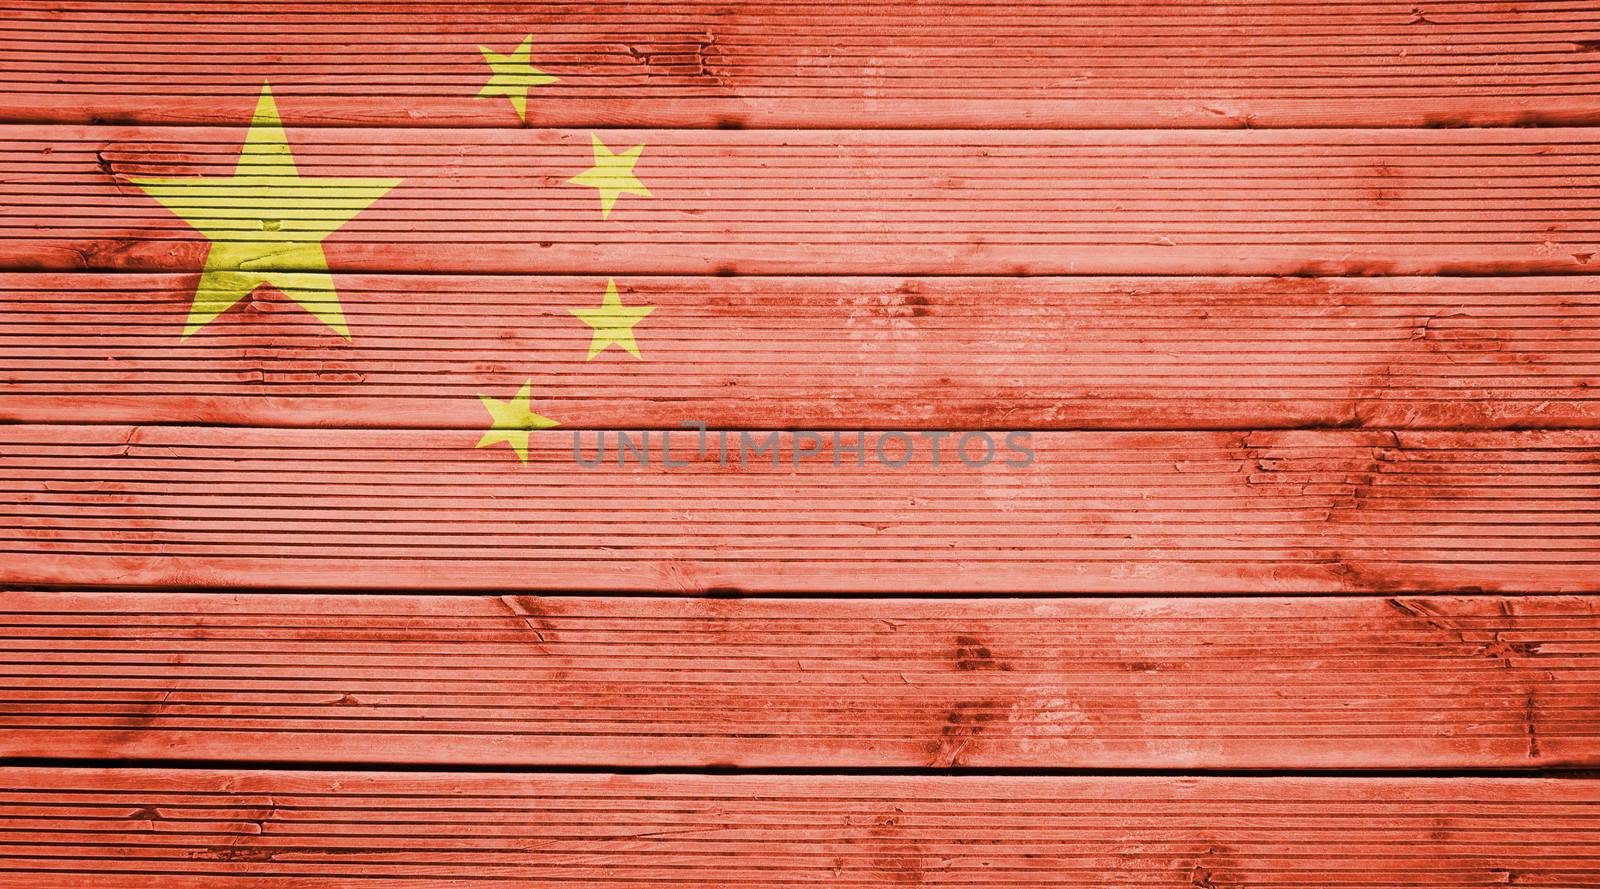 Wood texture background with colors of the flag of China by doble.d